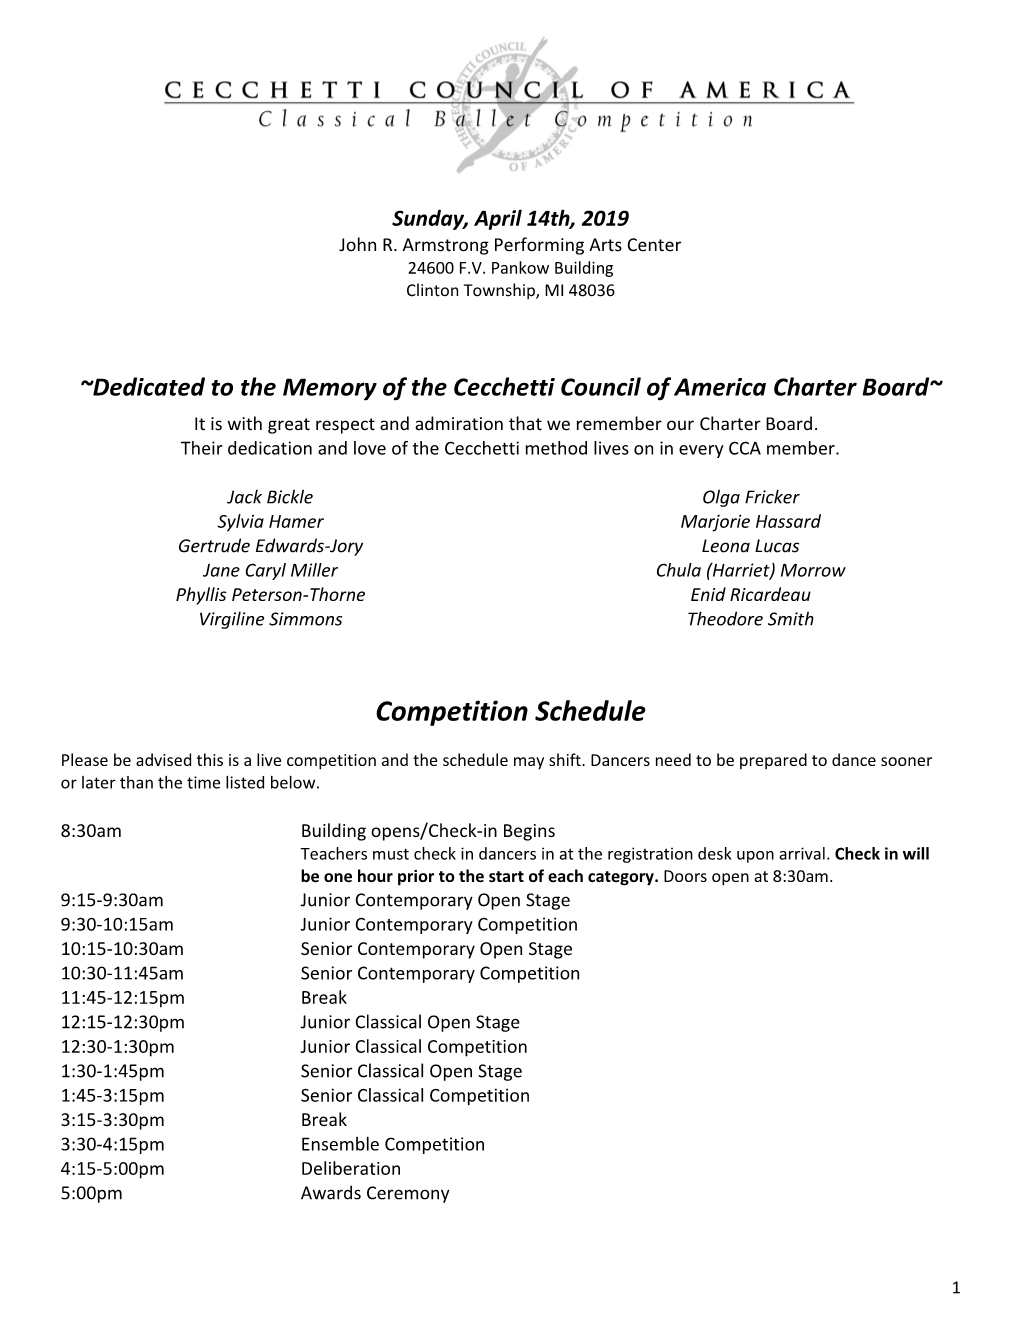 Competition Schedule